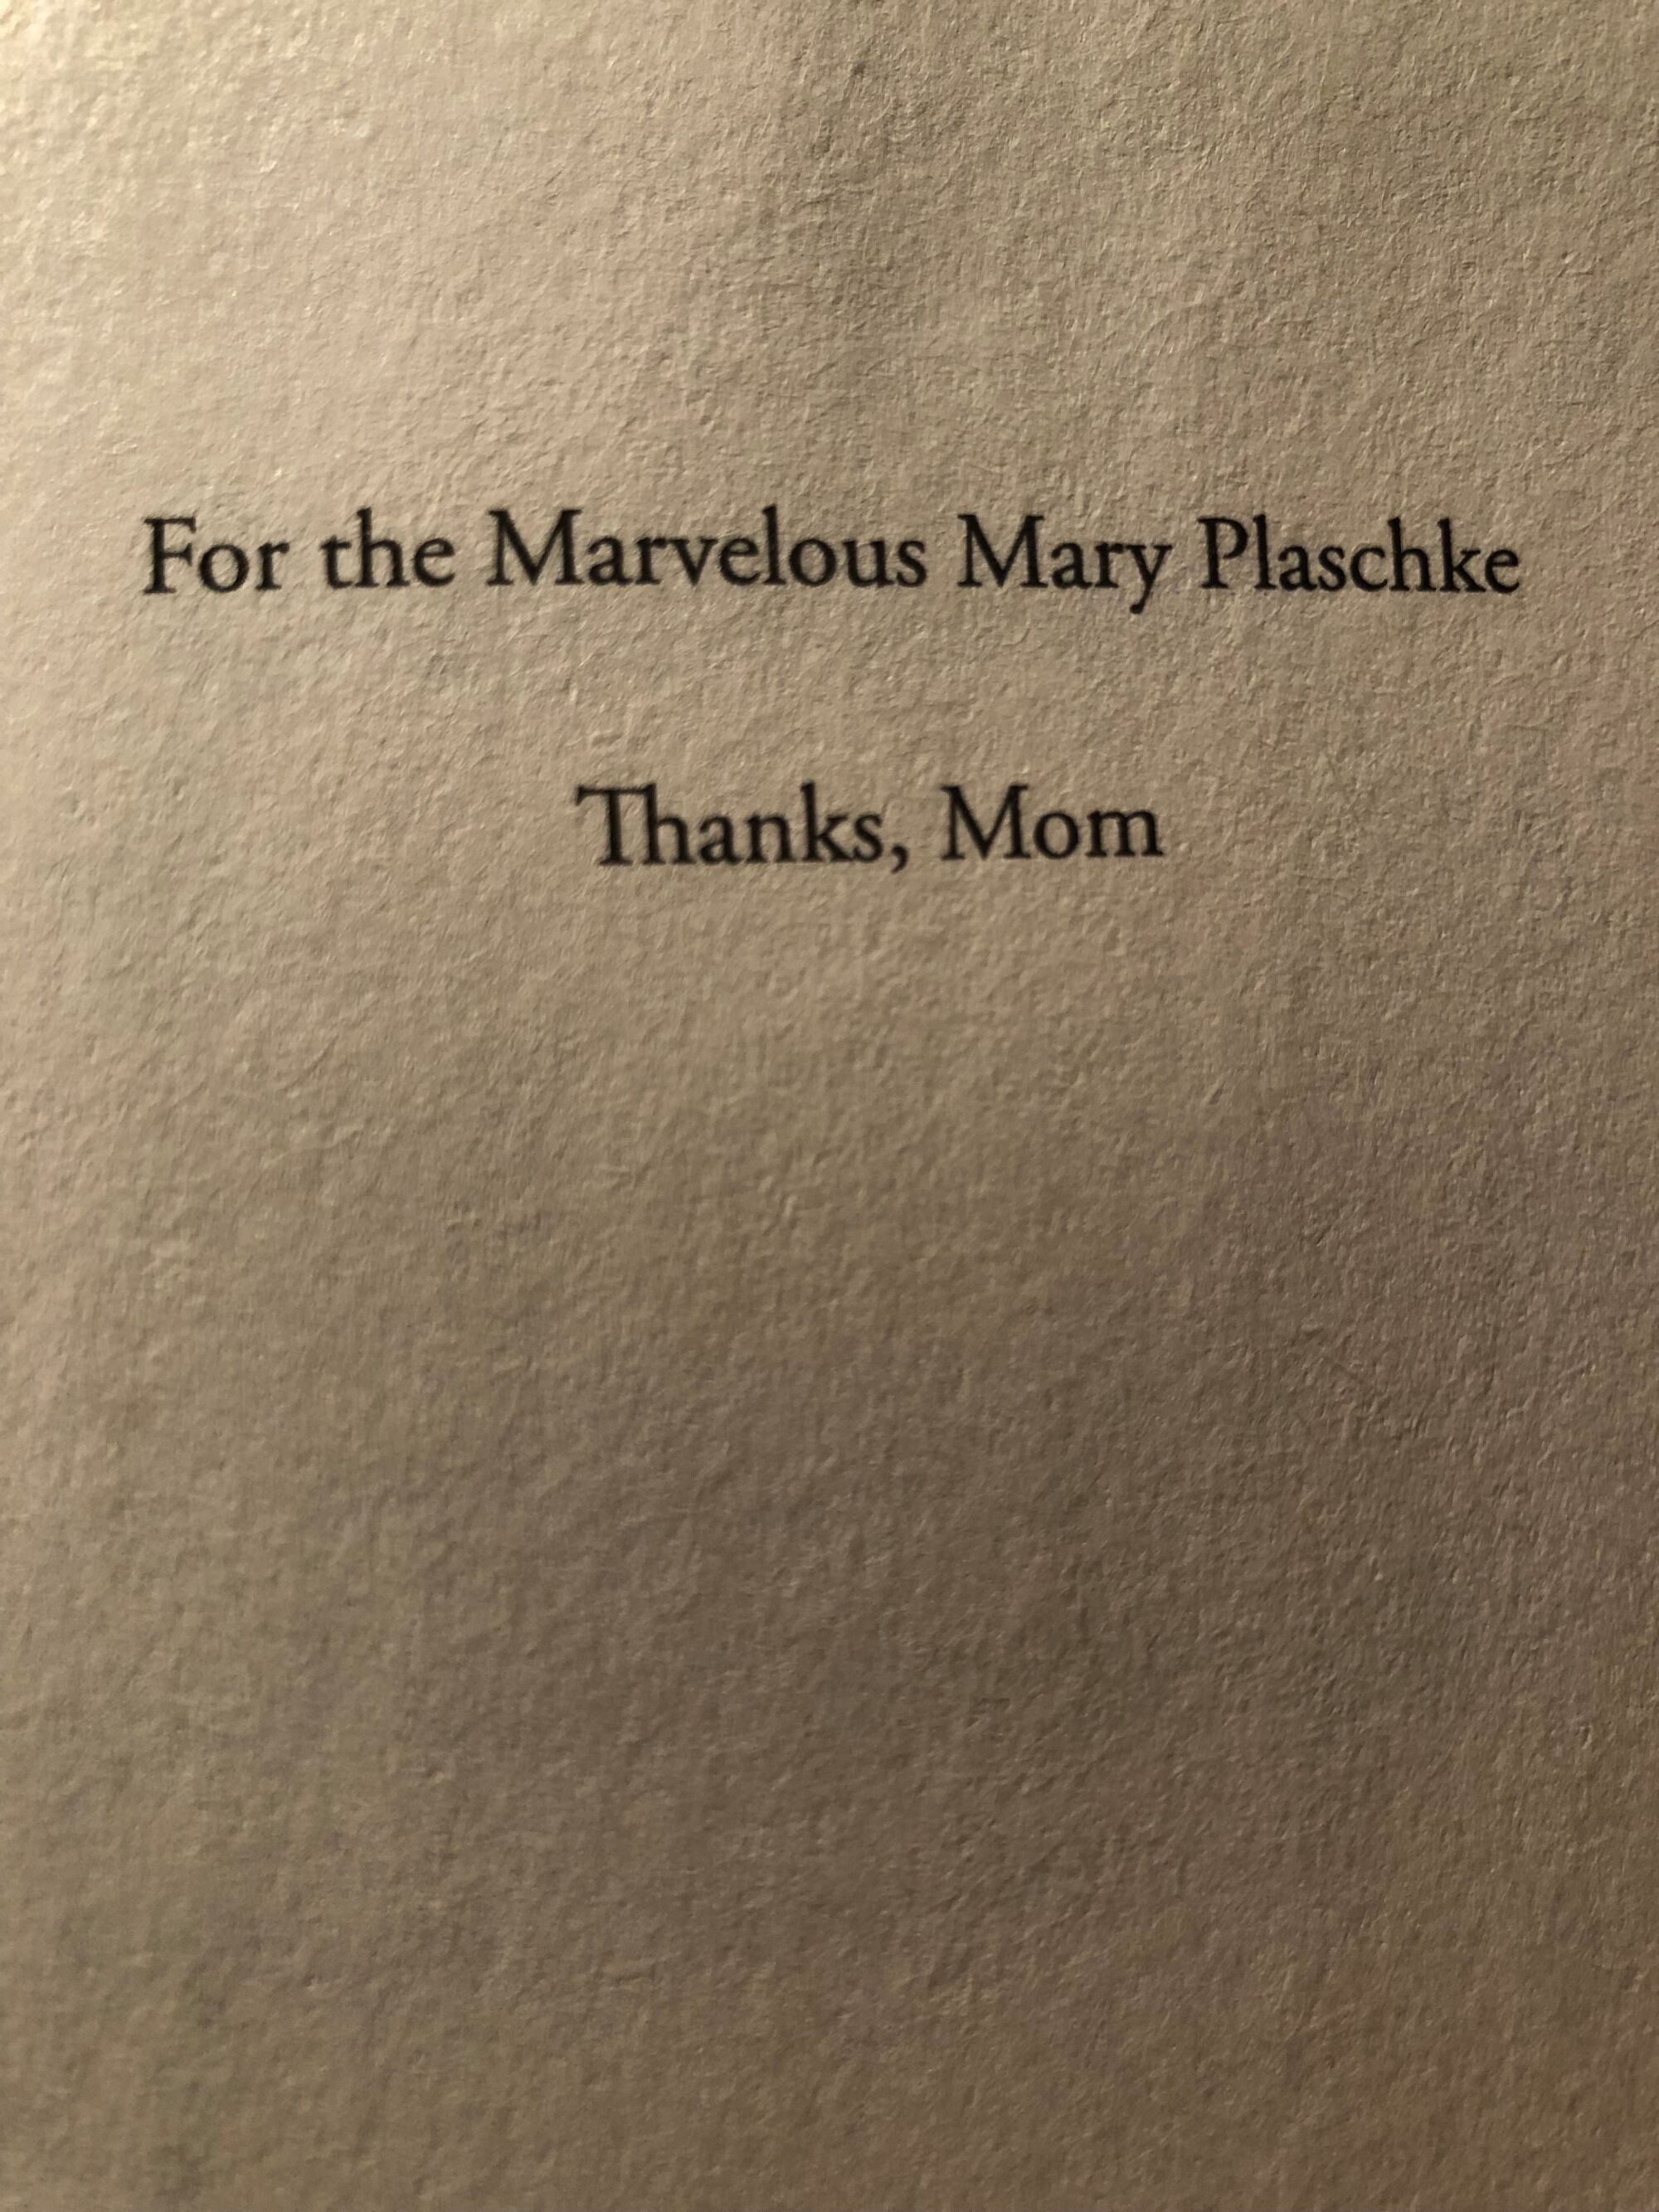 The dedication page to Bill Plaschke's book reads: "For the Marvelous Mary Plaschke. Thanks, mom."